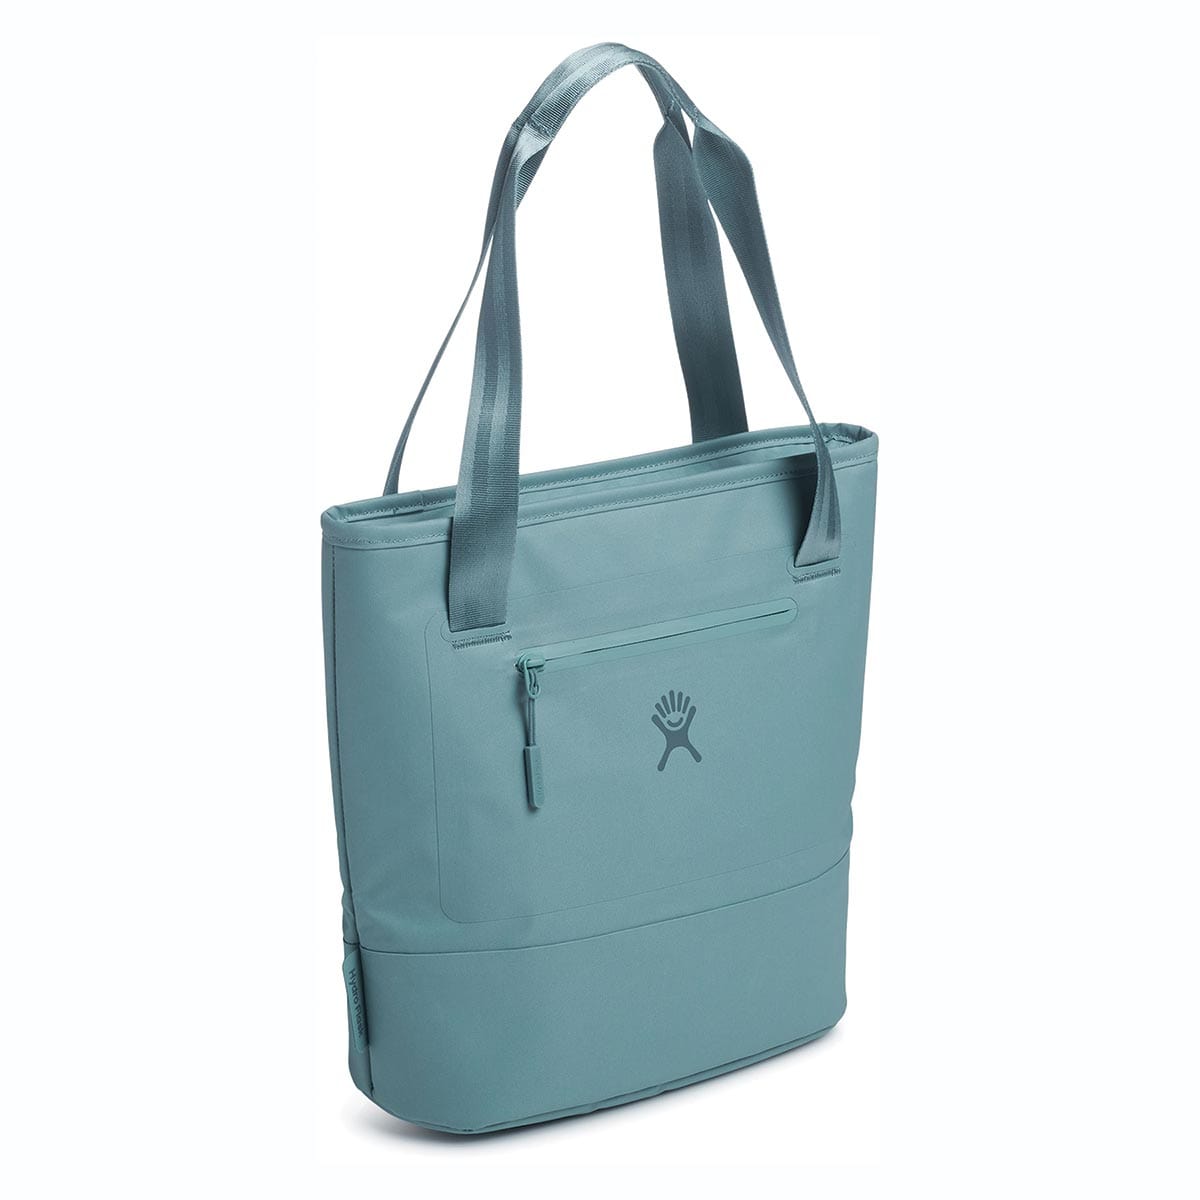 Hydro Flask 8L Lunch Tote